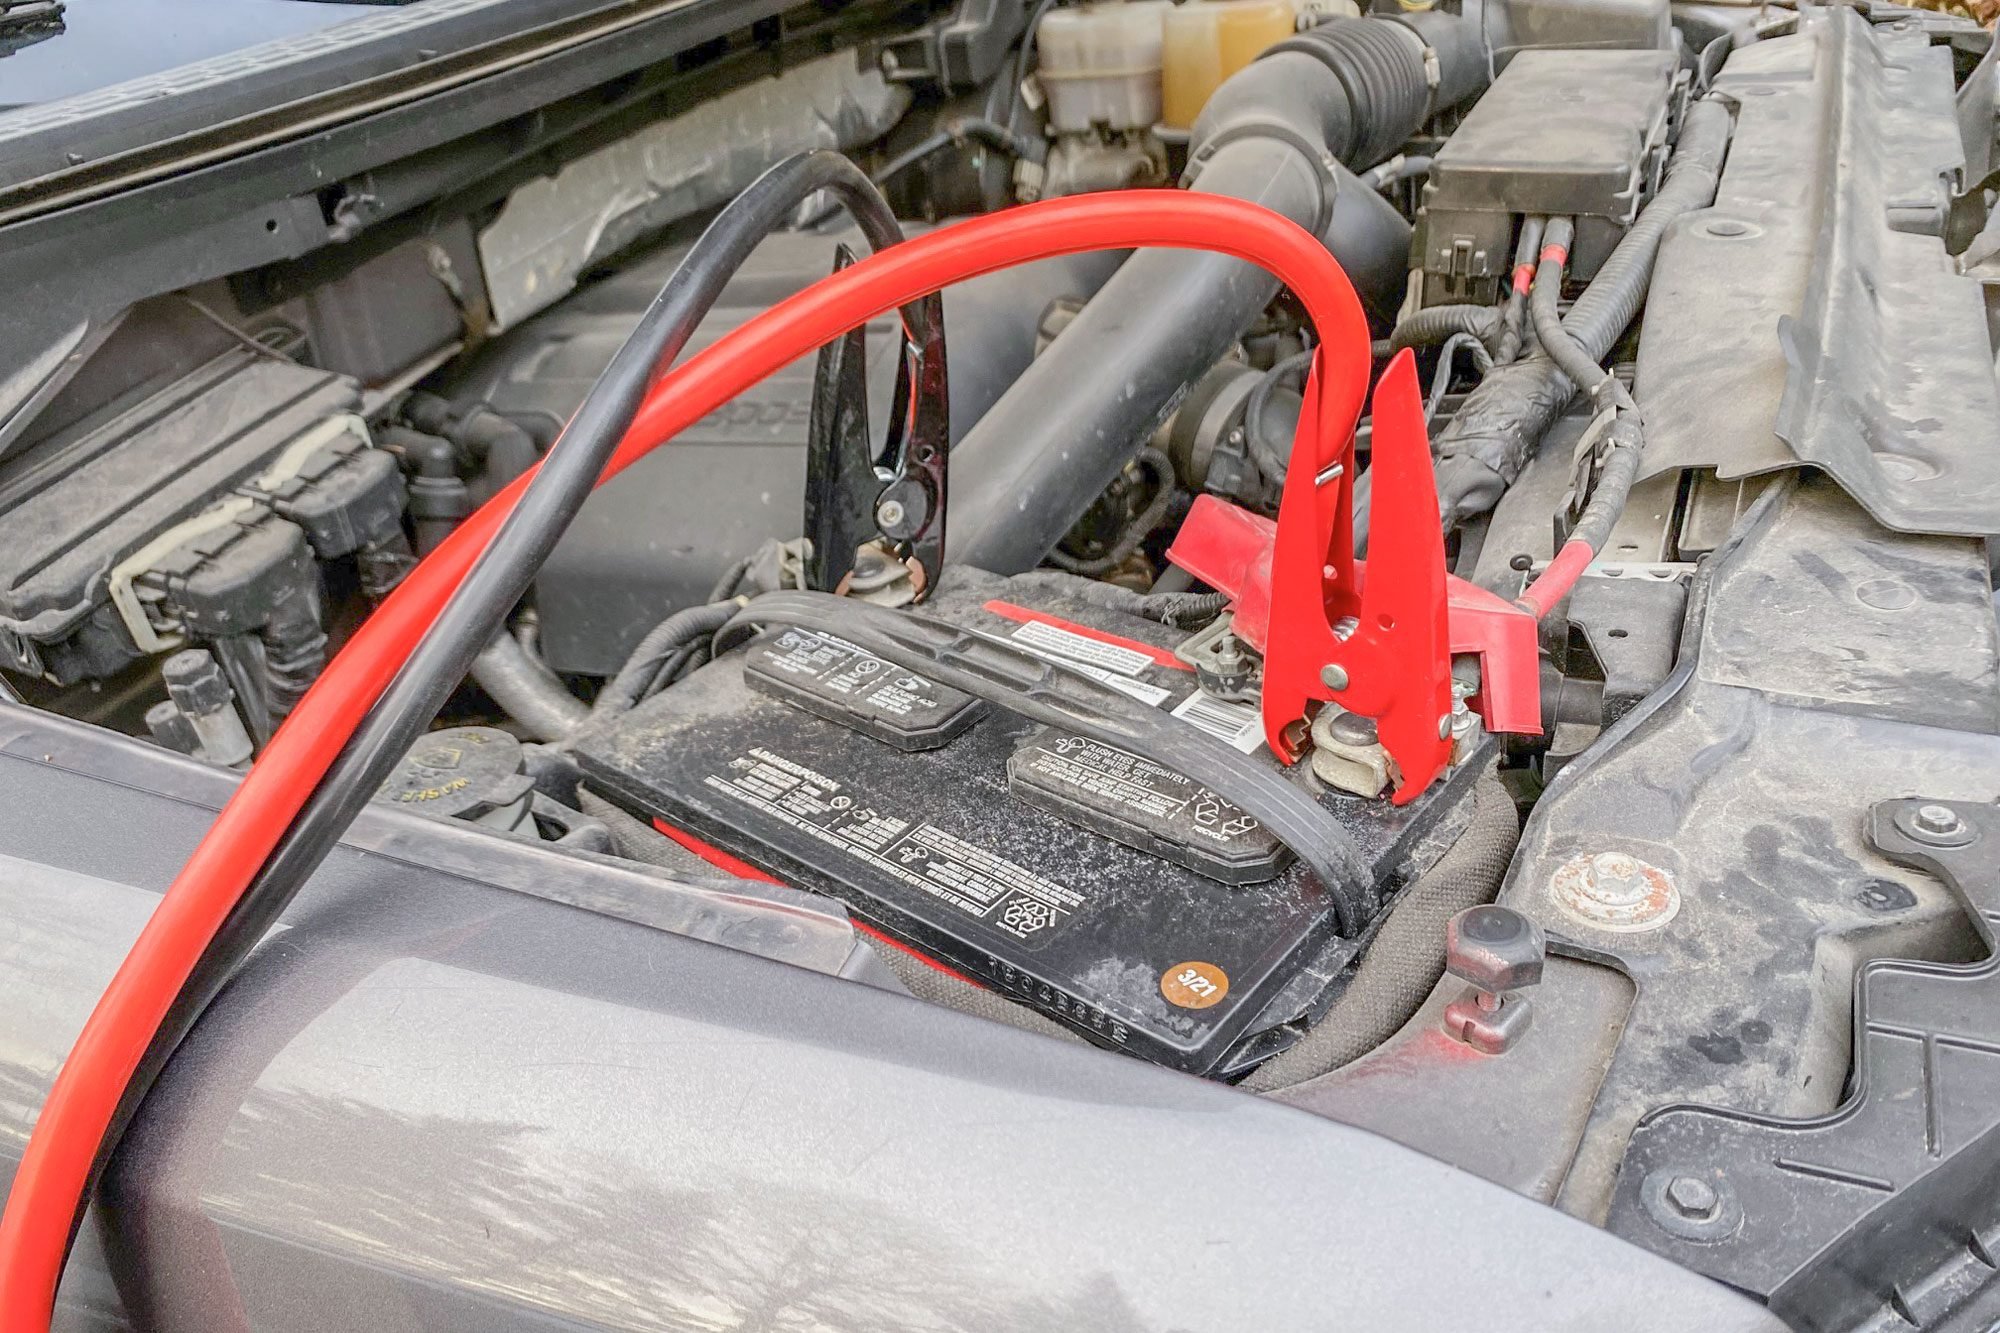 How To Jump-Start a Car Using Jumper Cables Safely